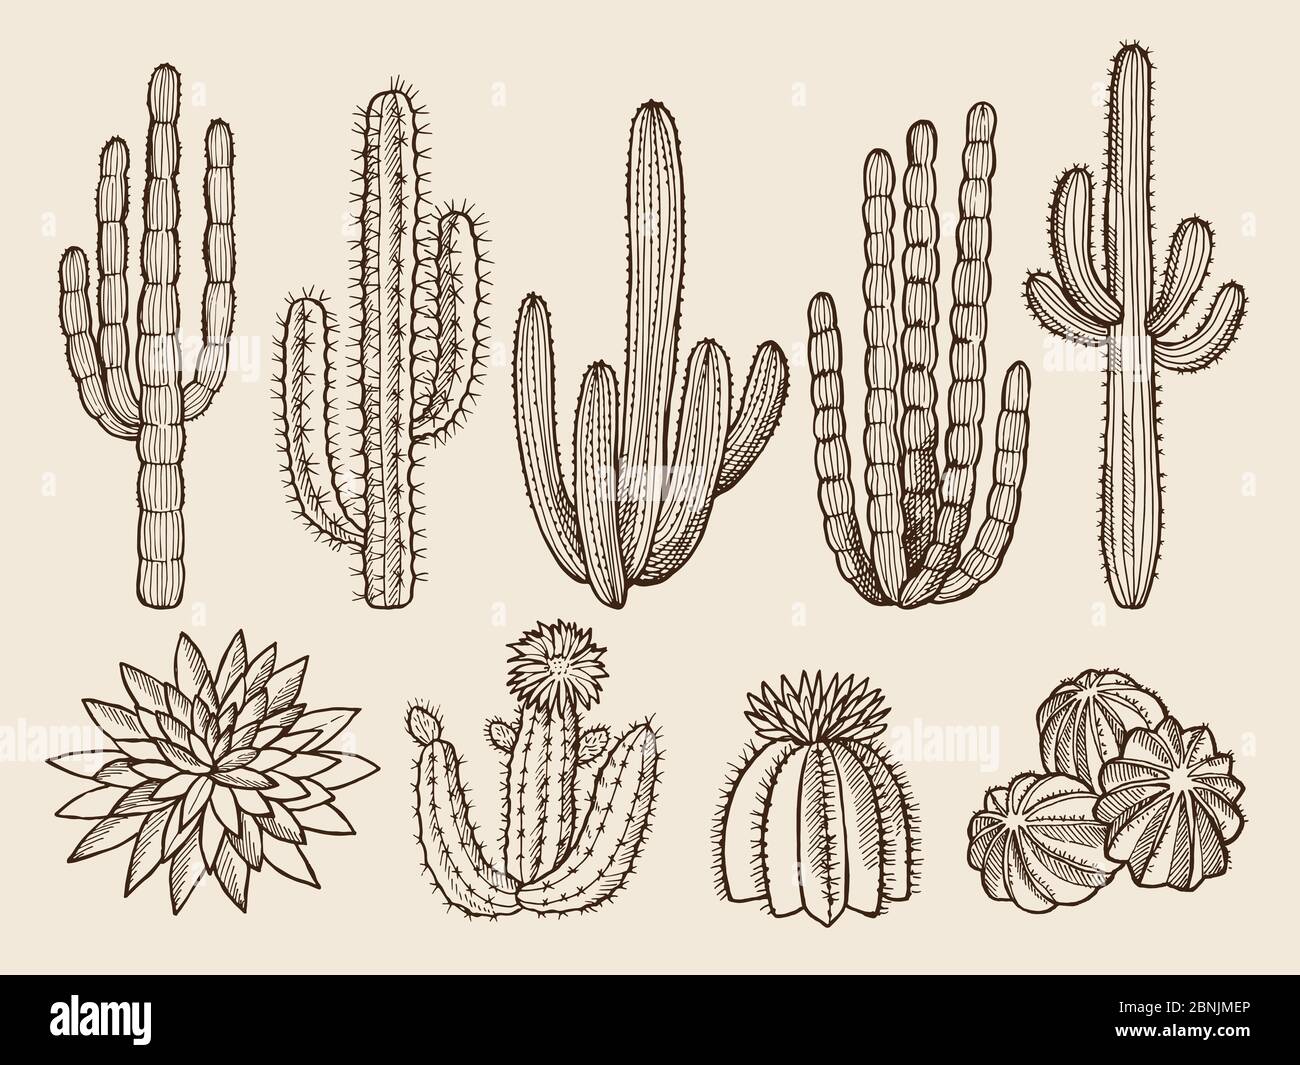 Sketch hand drawn illustrations of cactuses and various wild plants Stock Vector